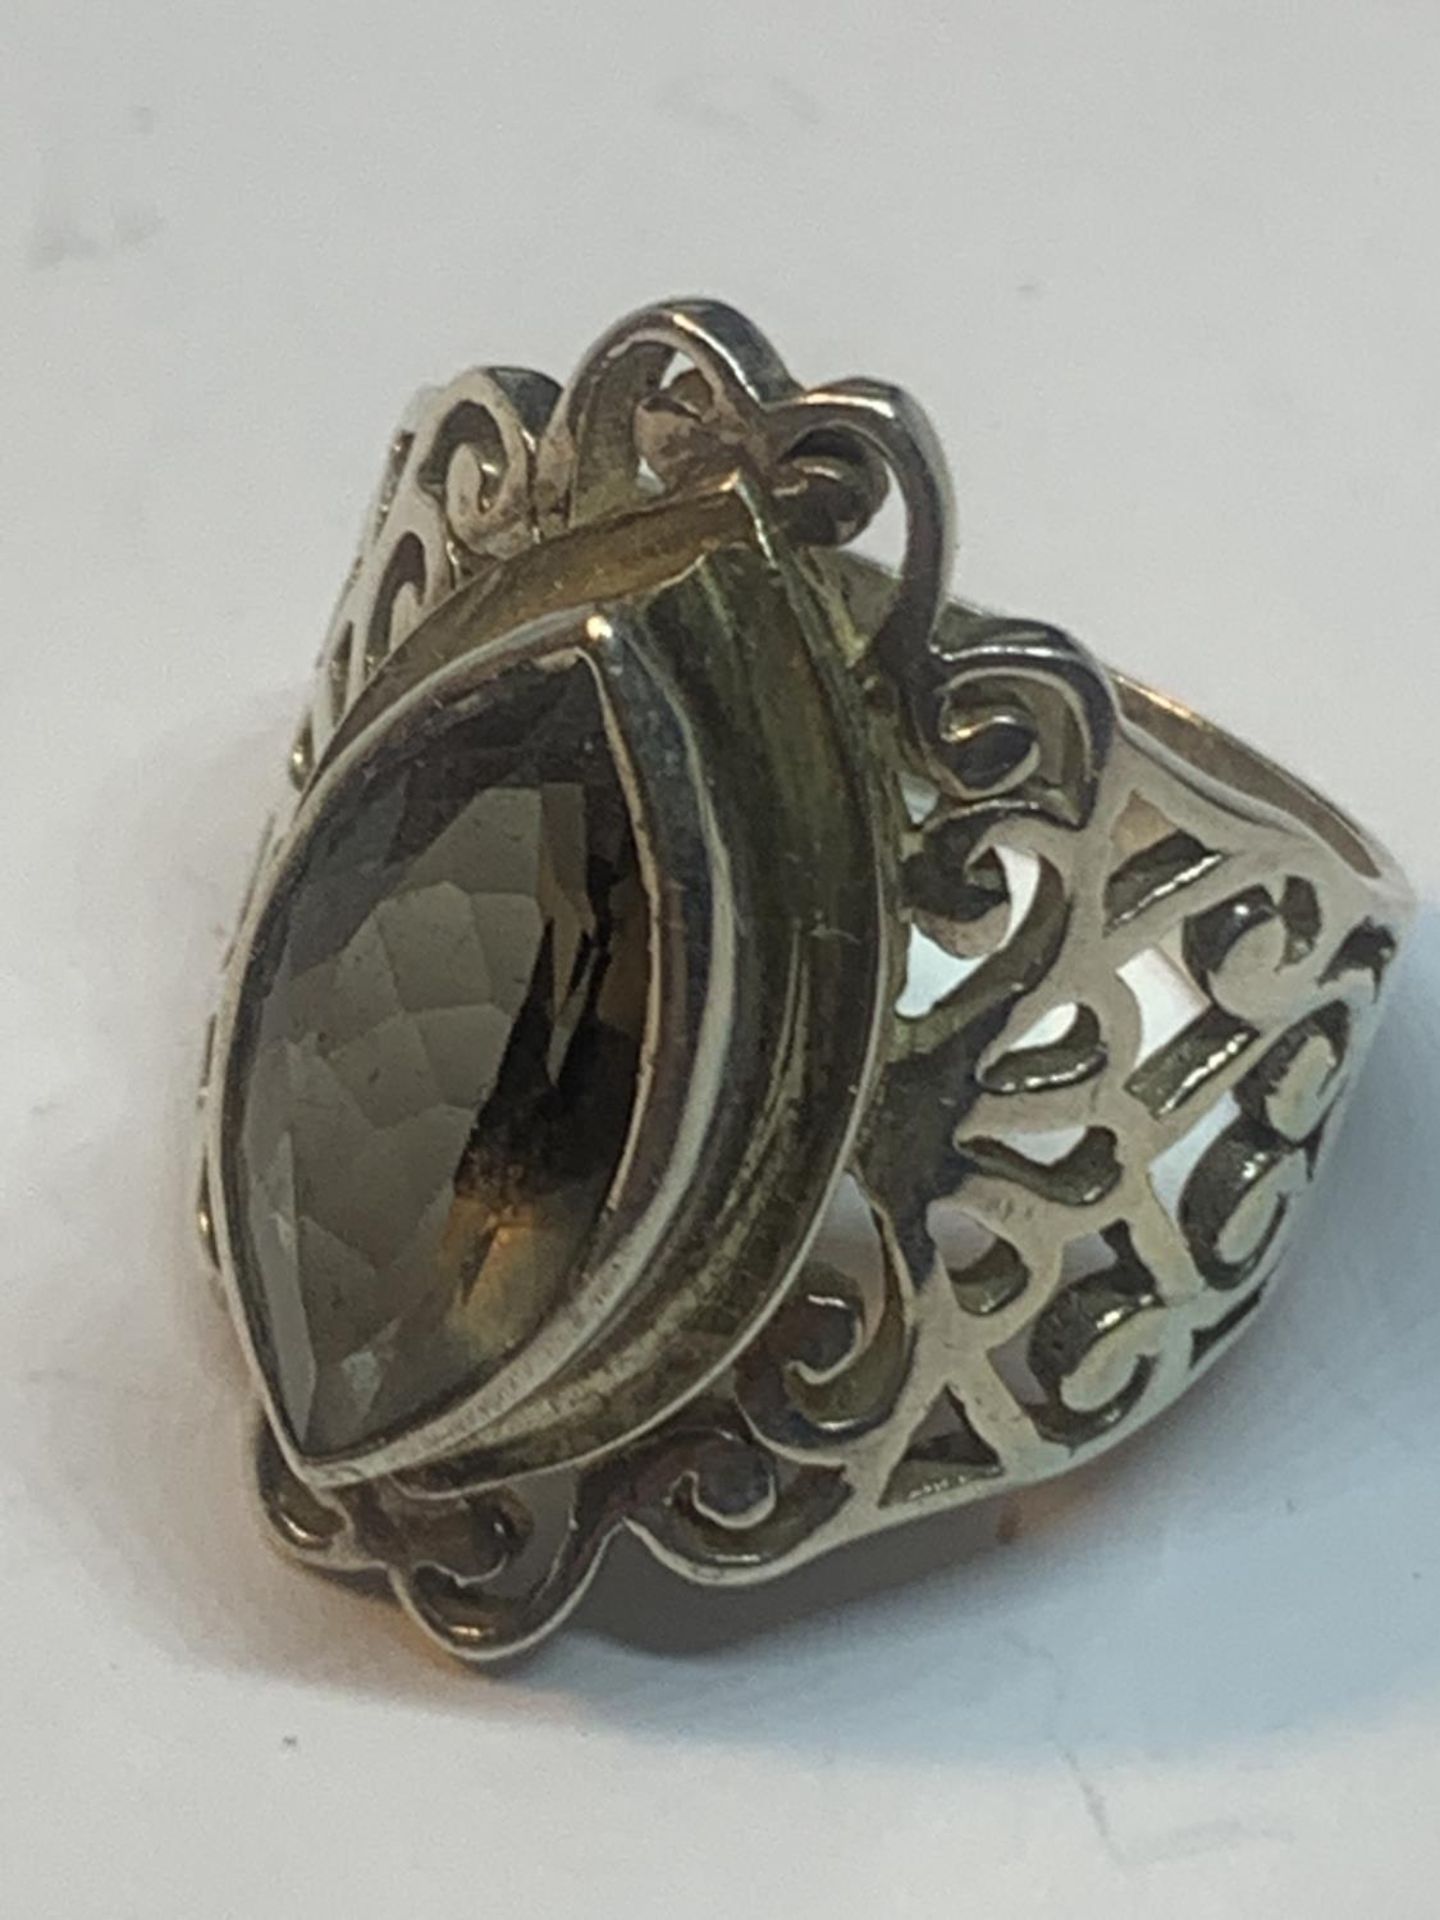 A SILVER DRESS RING WITH A SMOKEY STONE IN A PRESENTATION BOX - Image 3 of 4